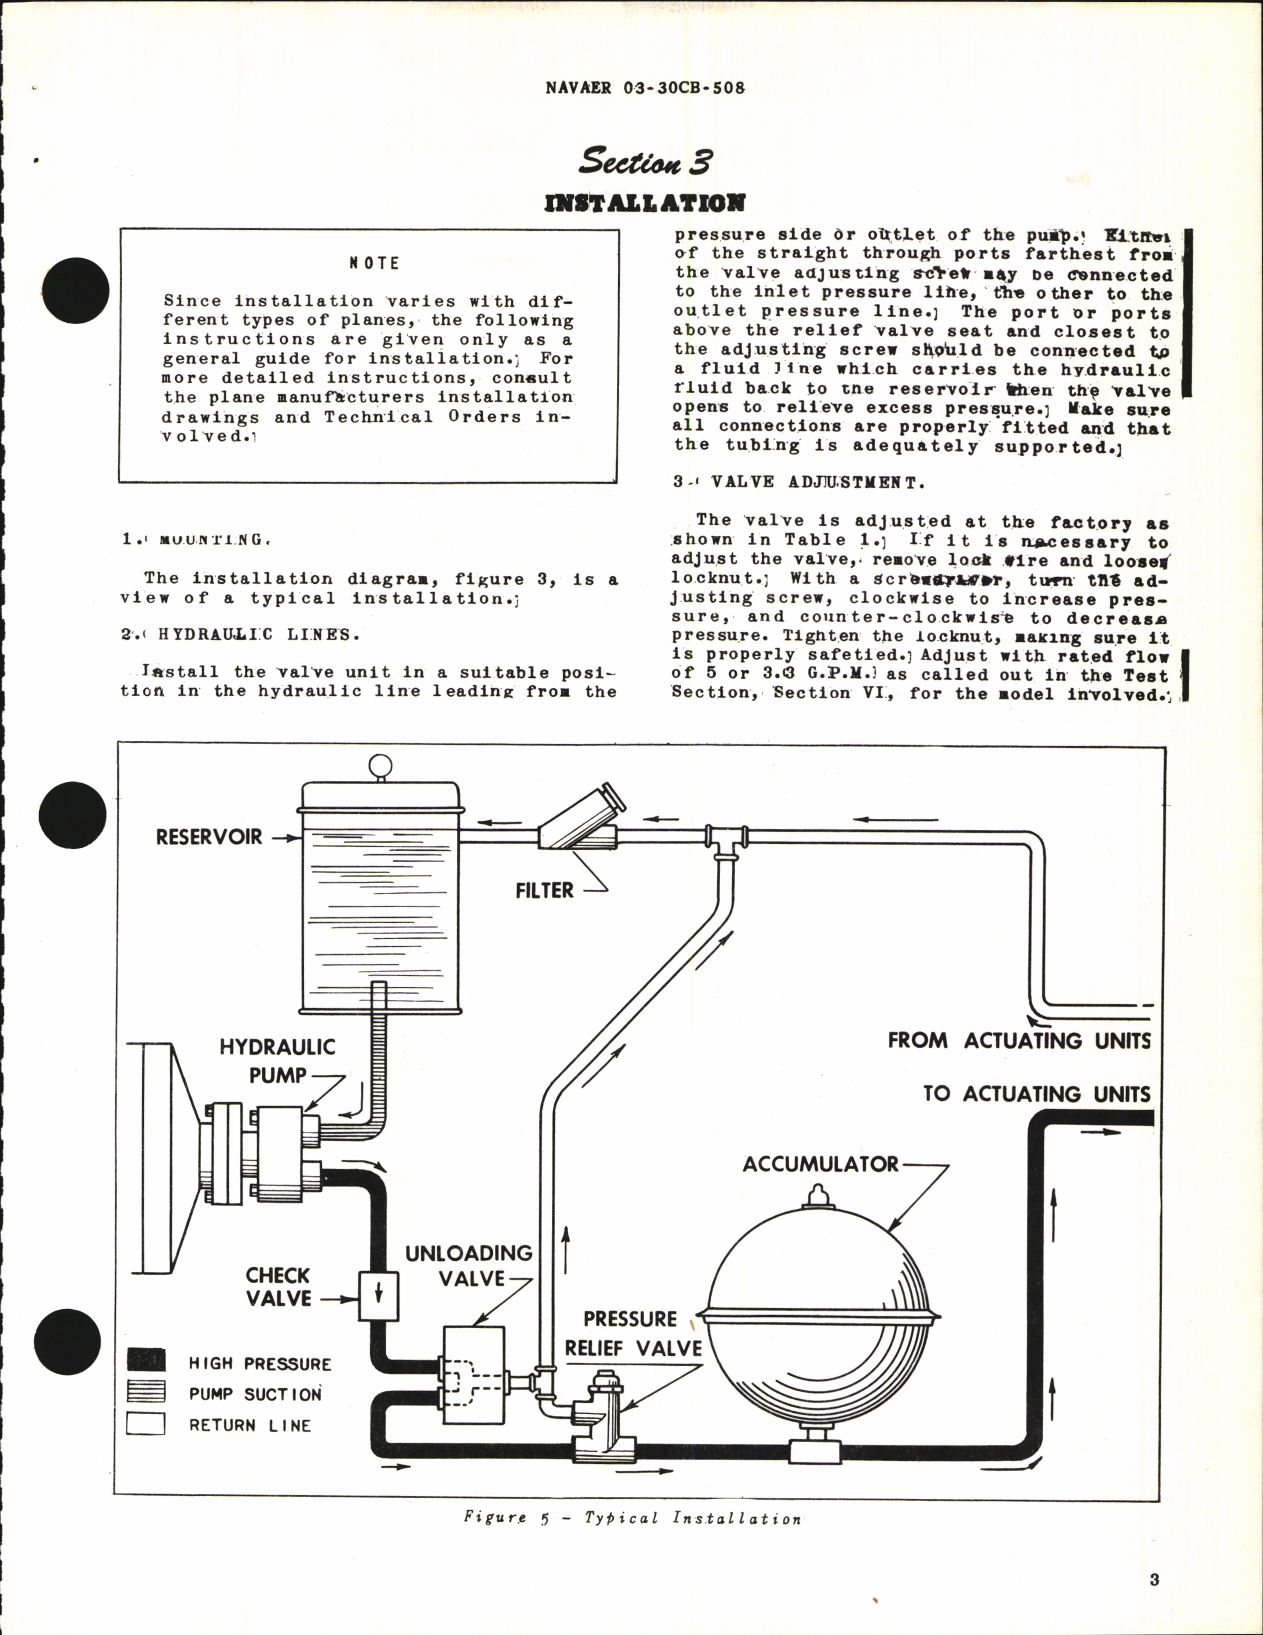 Sample page 7 from AirCorps Library document: Operation, Service and Overhaul Instructions with Parts Catalog for Hydraulic Relief Valves